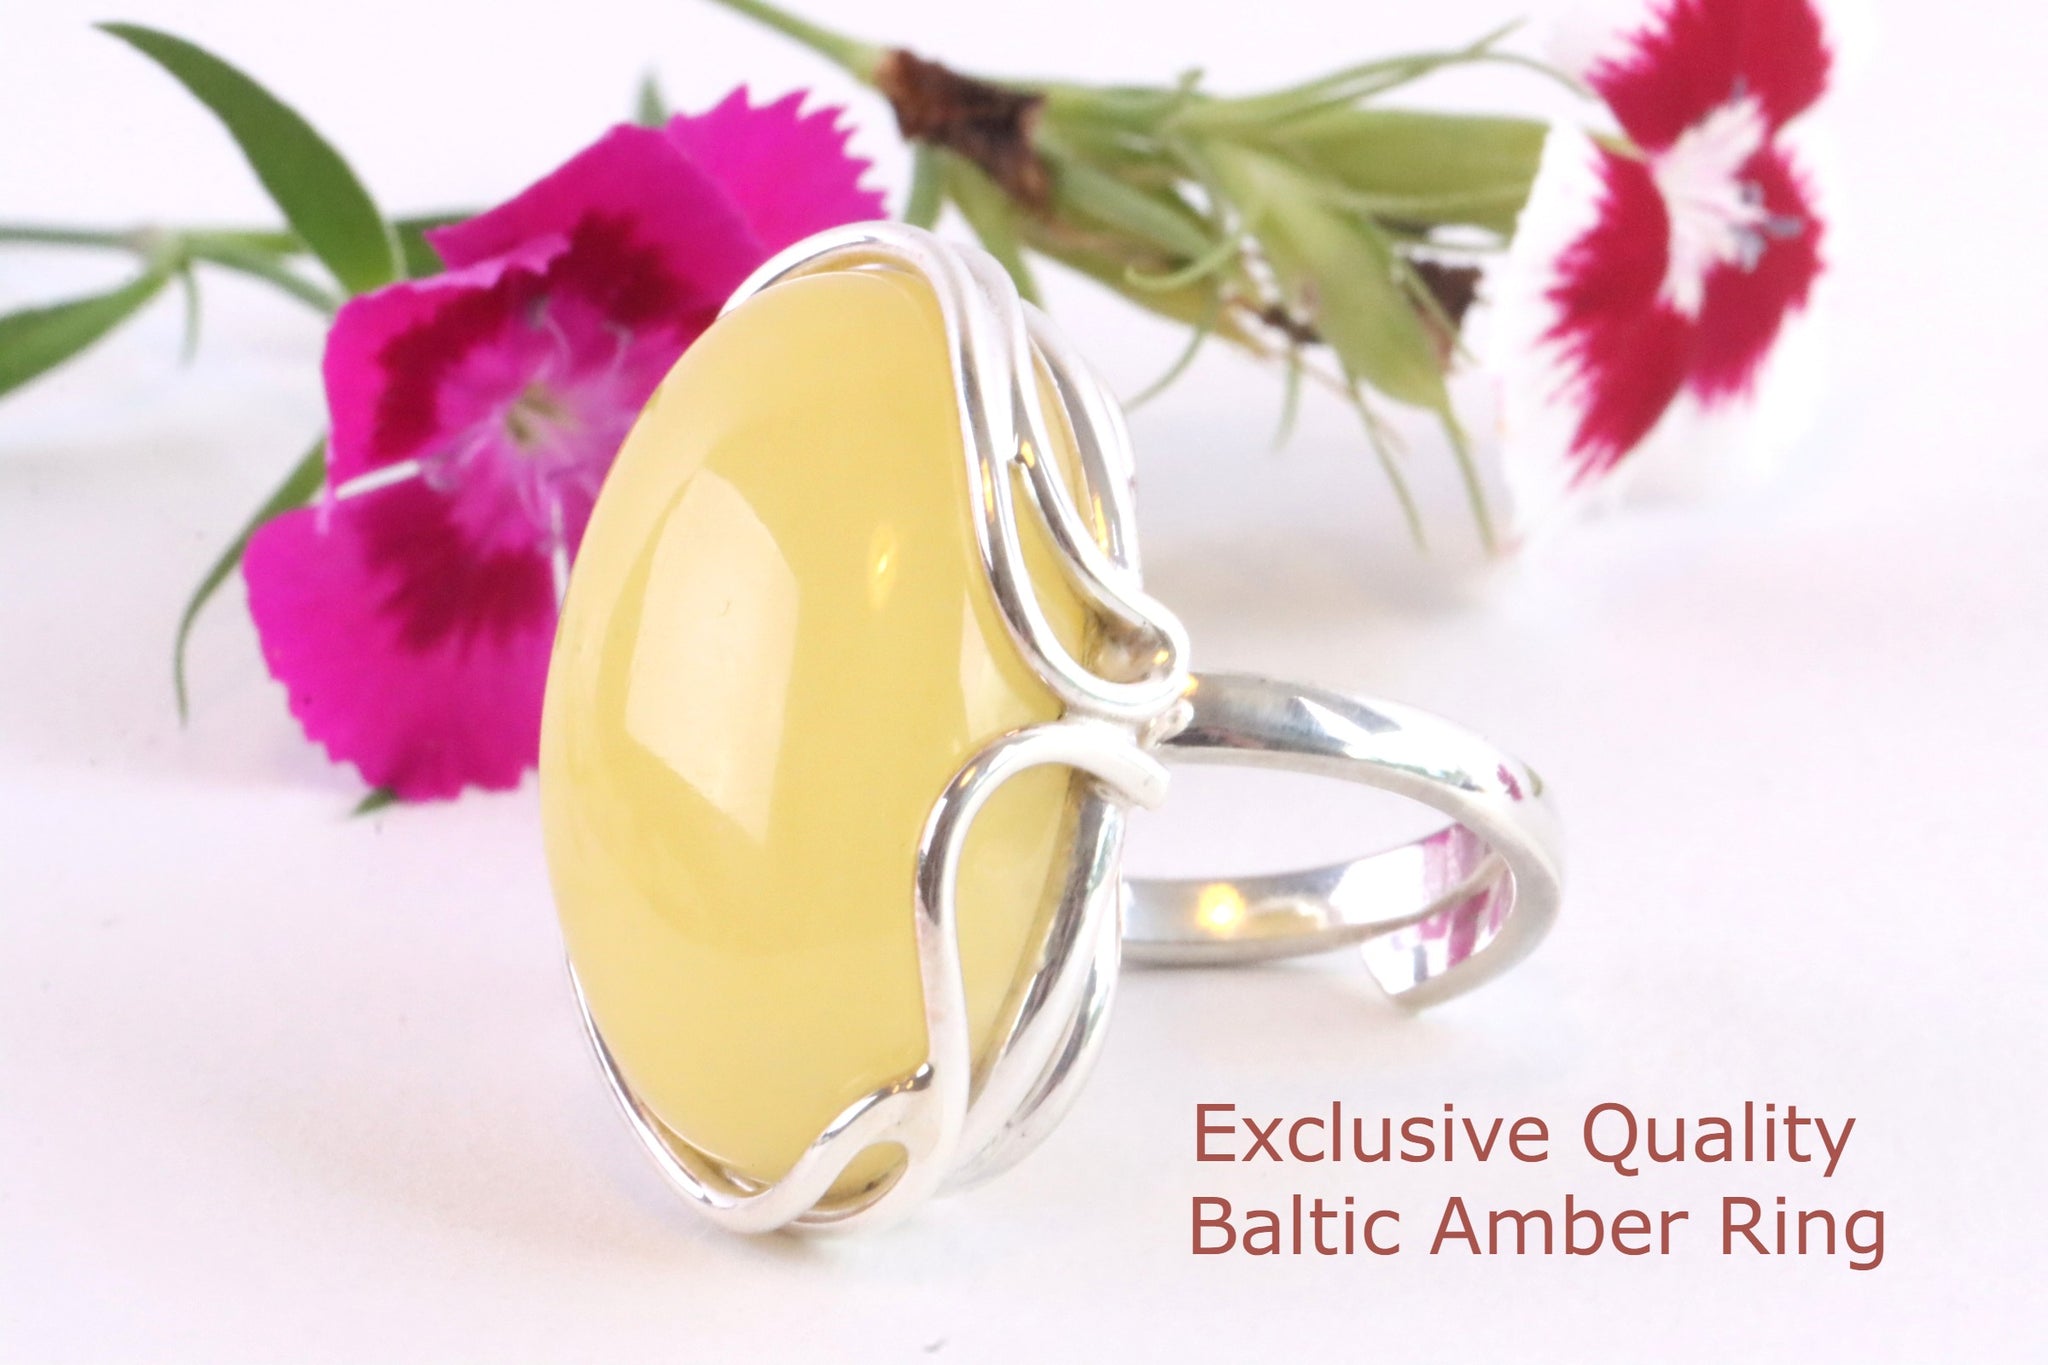 925 Sterling Silver White Baltic Amber Ring